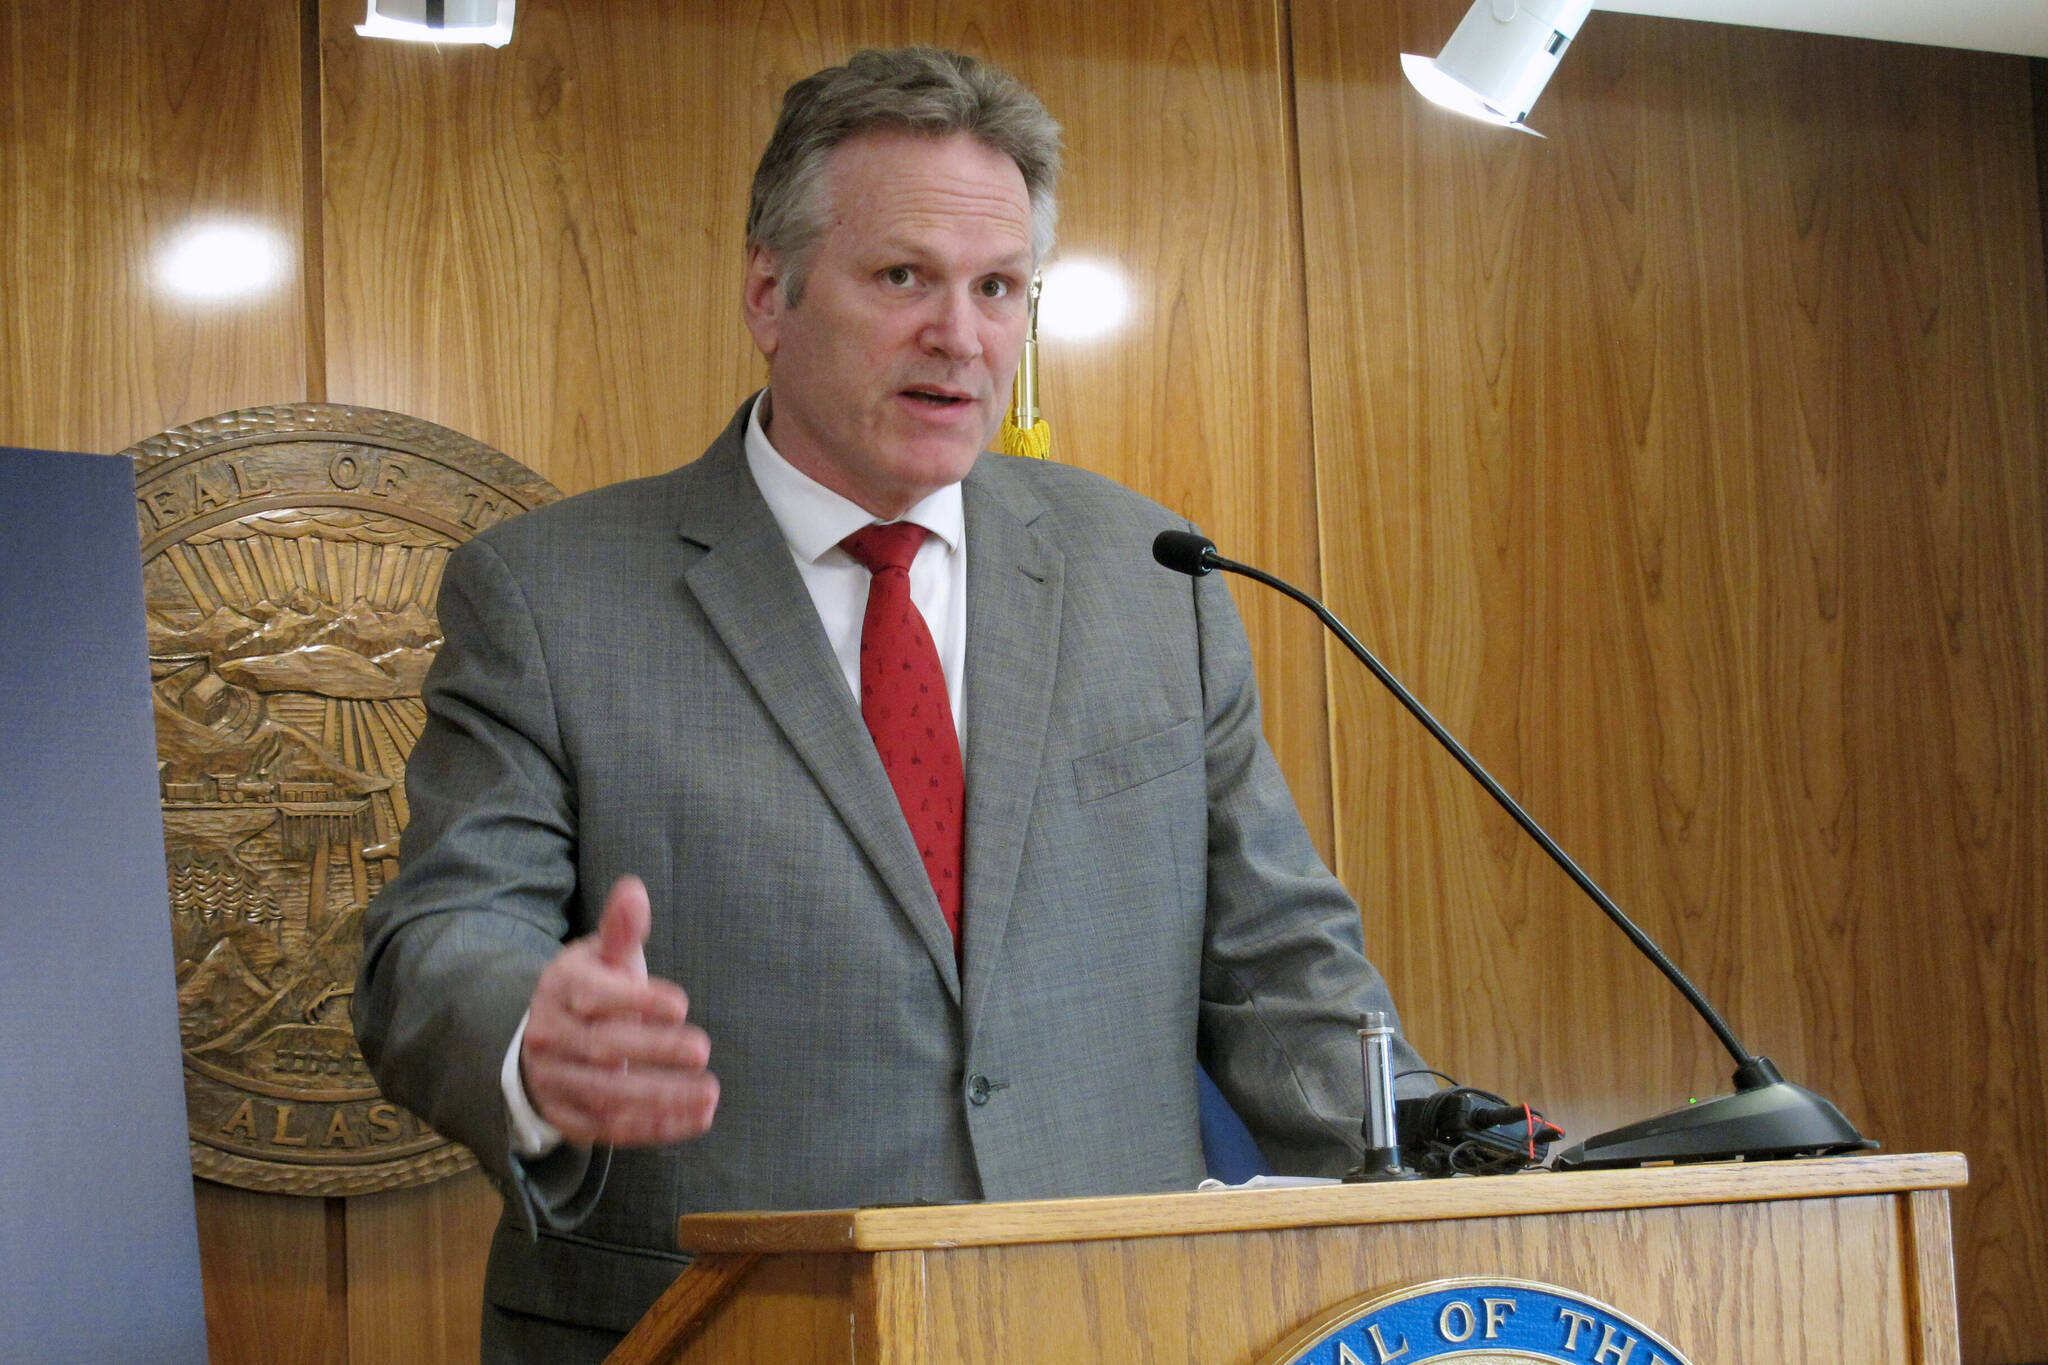 Alaska Gov. Mike Dunleavy speaks to reporters during a news conference at the state Capitol on Thursday, April 28, 2022, in Juneau, Alaska. Dunleavy discussed issues he would like to see the Legislature act on in the remaining weeks of the legislative session. (AP Photo/Becky Bohrer)